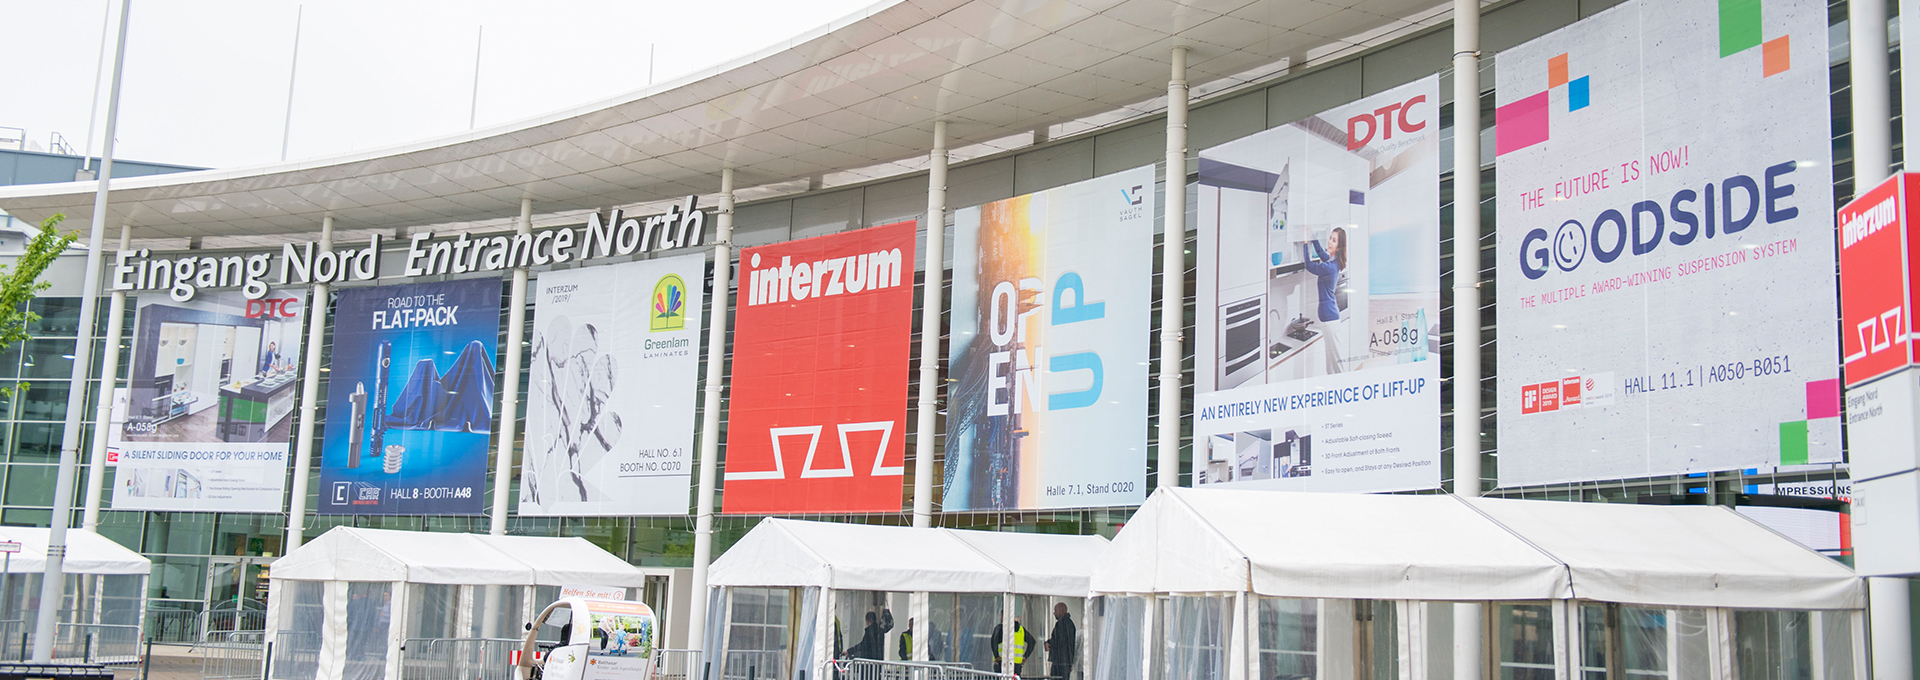 Cologne, Germany, Interzum Exihibition: A New Star in the Industry!